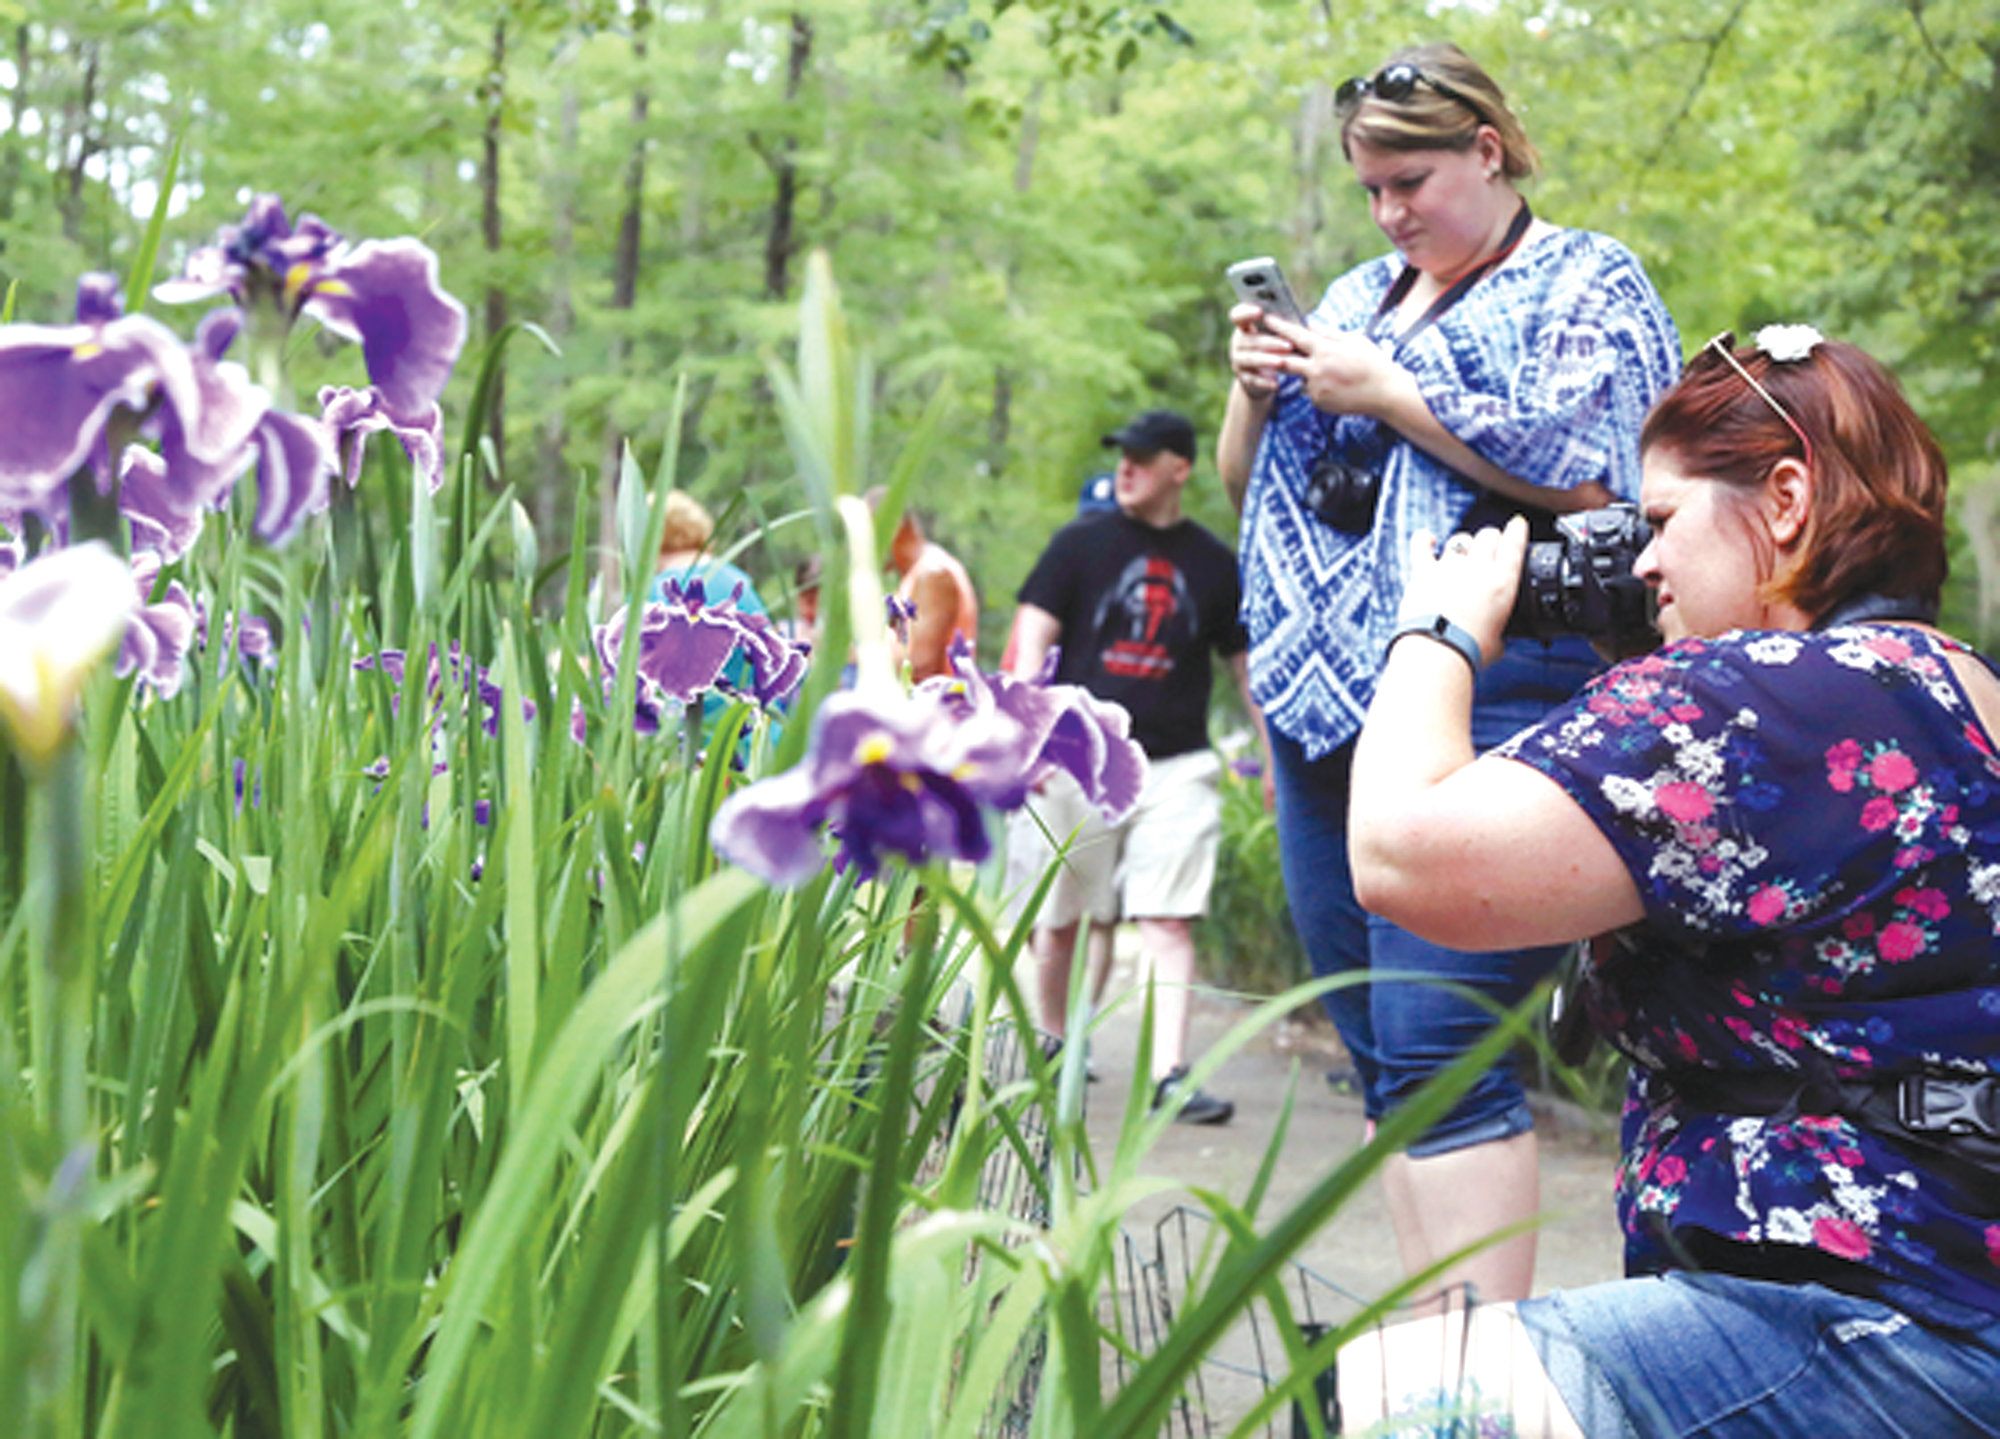 Sumter S Iris Festival Events Begin Thursday With Taste At The